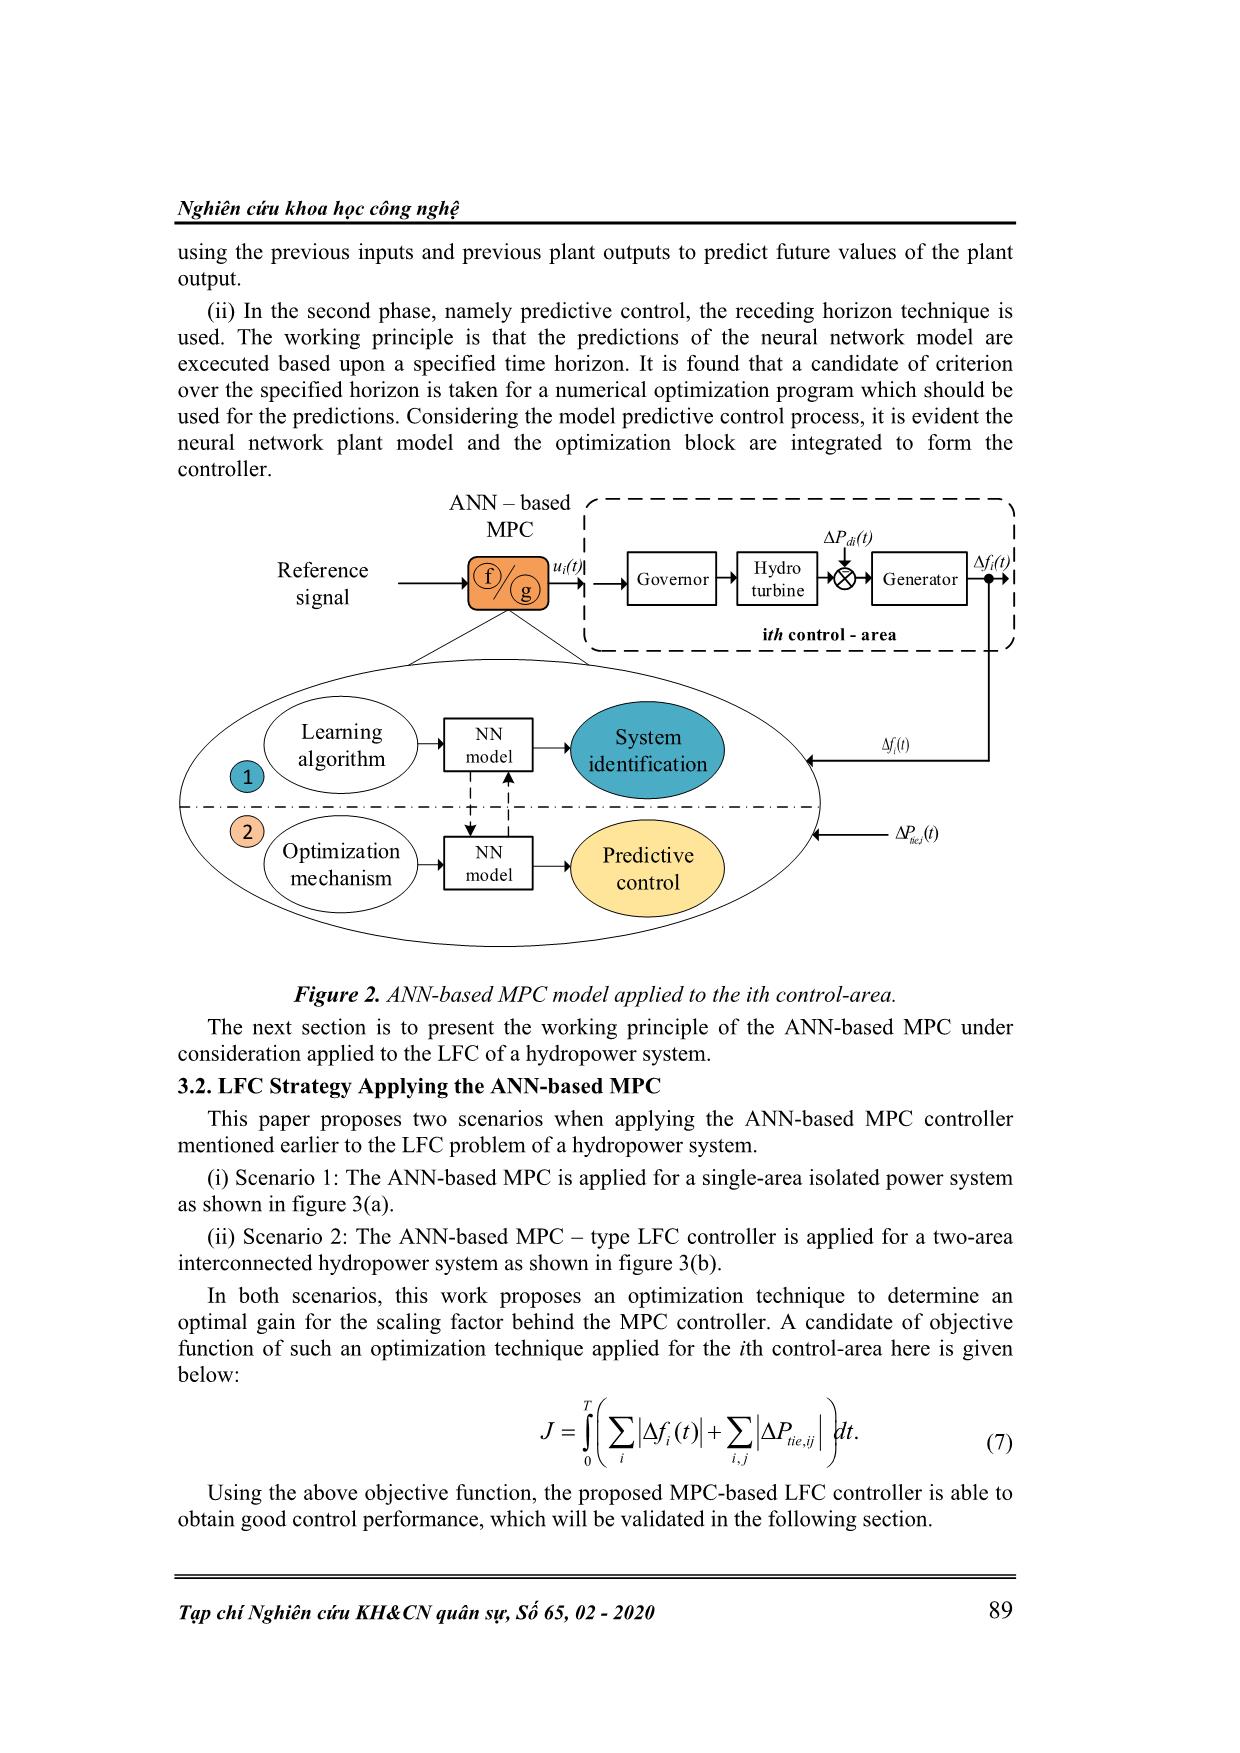 Study on application of ann - based mpc controllers for load-frequency control of an interconnected hydropower plant trang 4